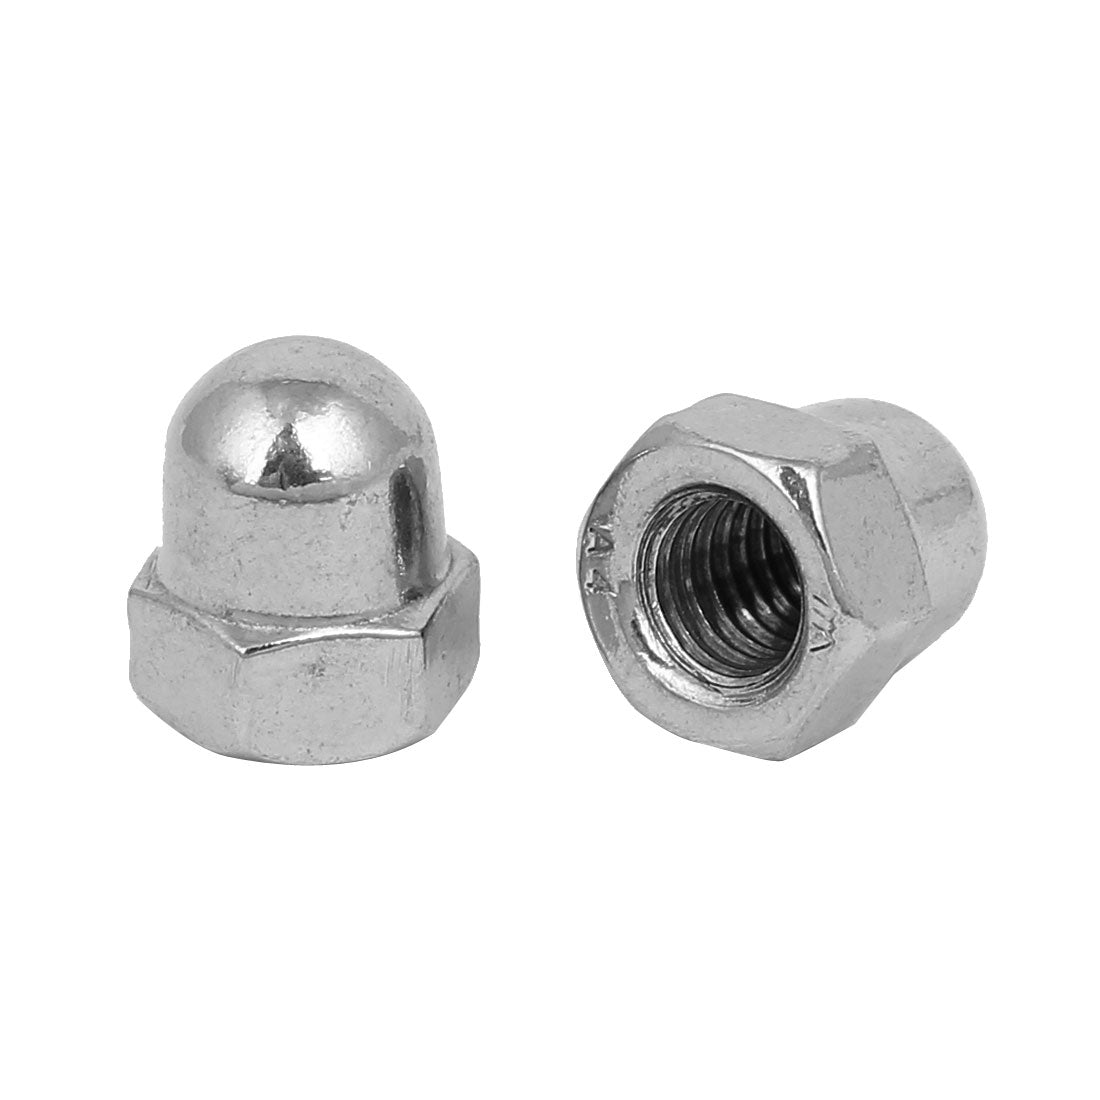 Uxcell Uxcell M4 Thread Dia 316 Stainless Steel Dome Head Cap Acorn Hex Nut Silver Tone 10pcs